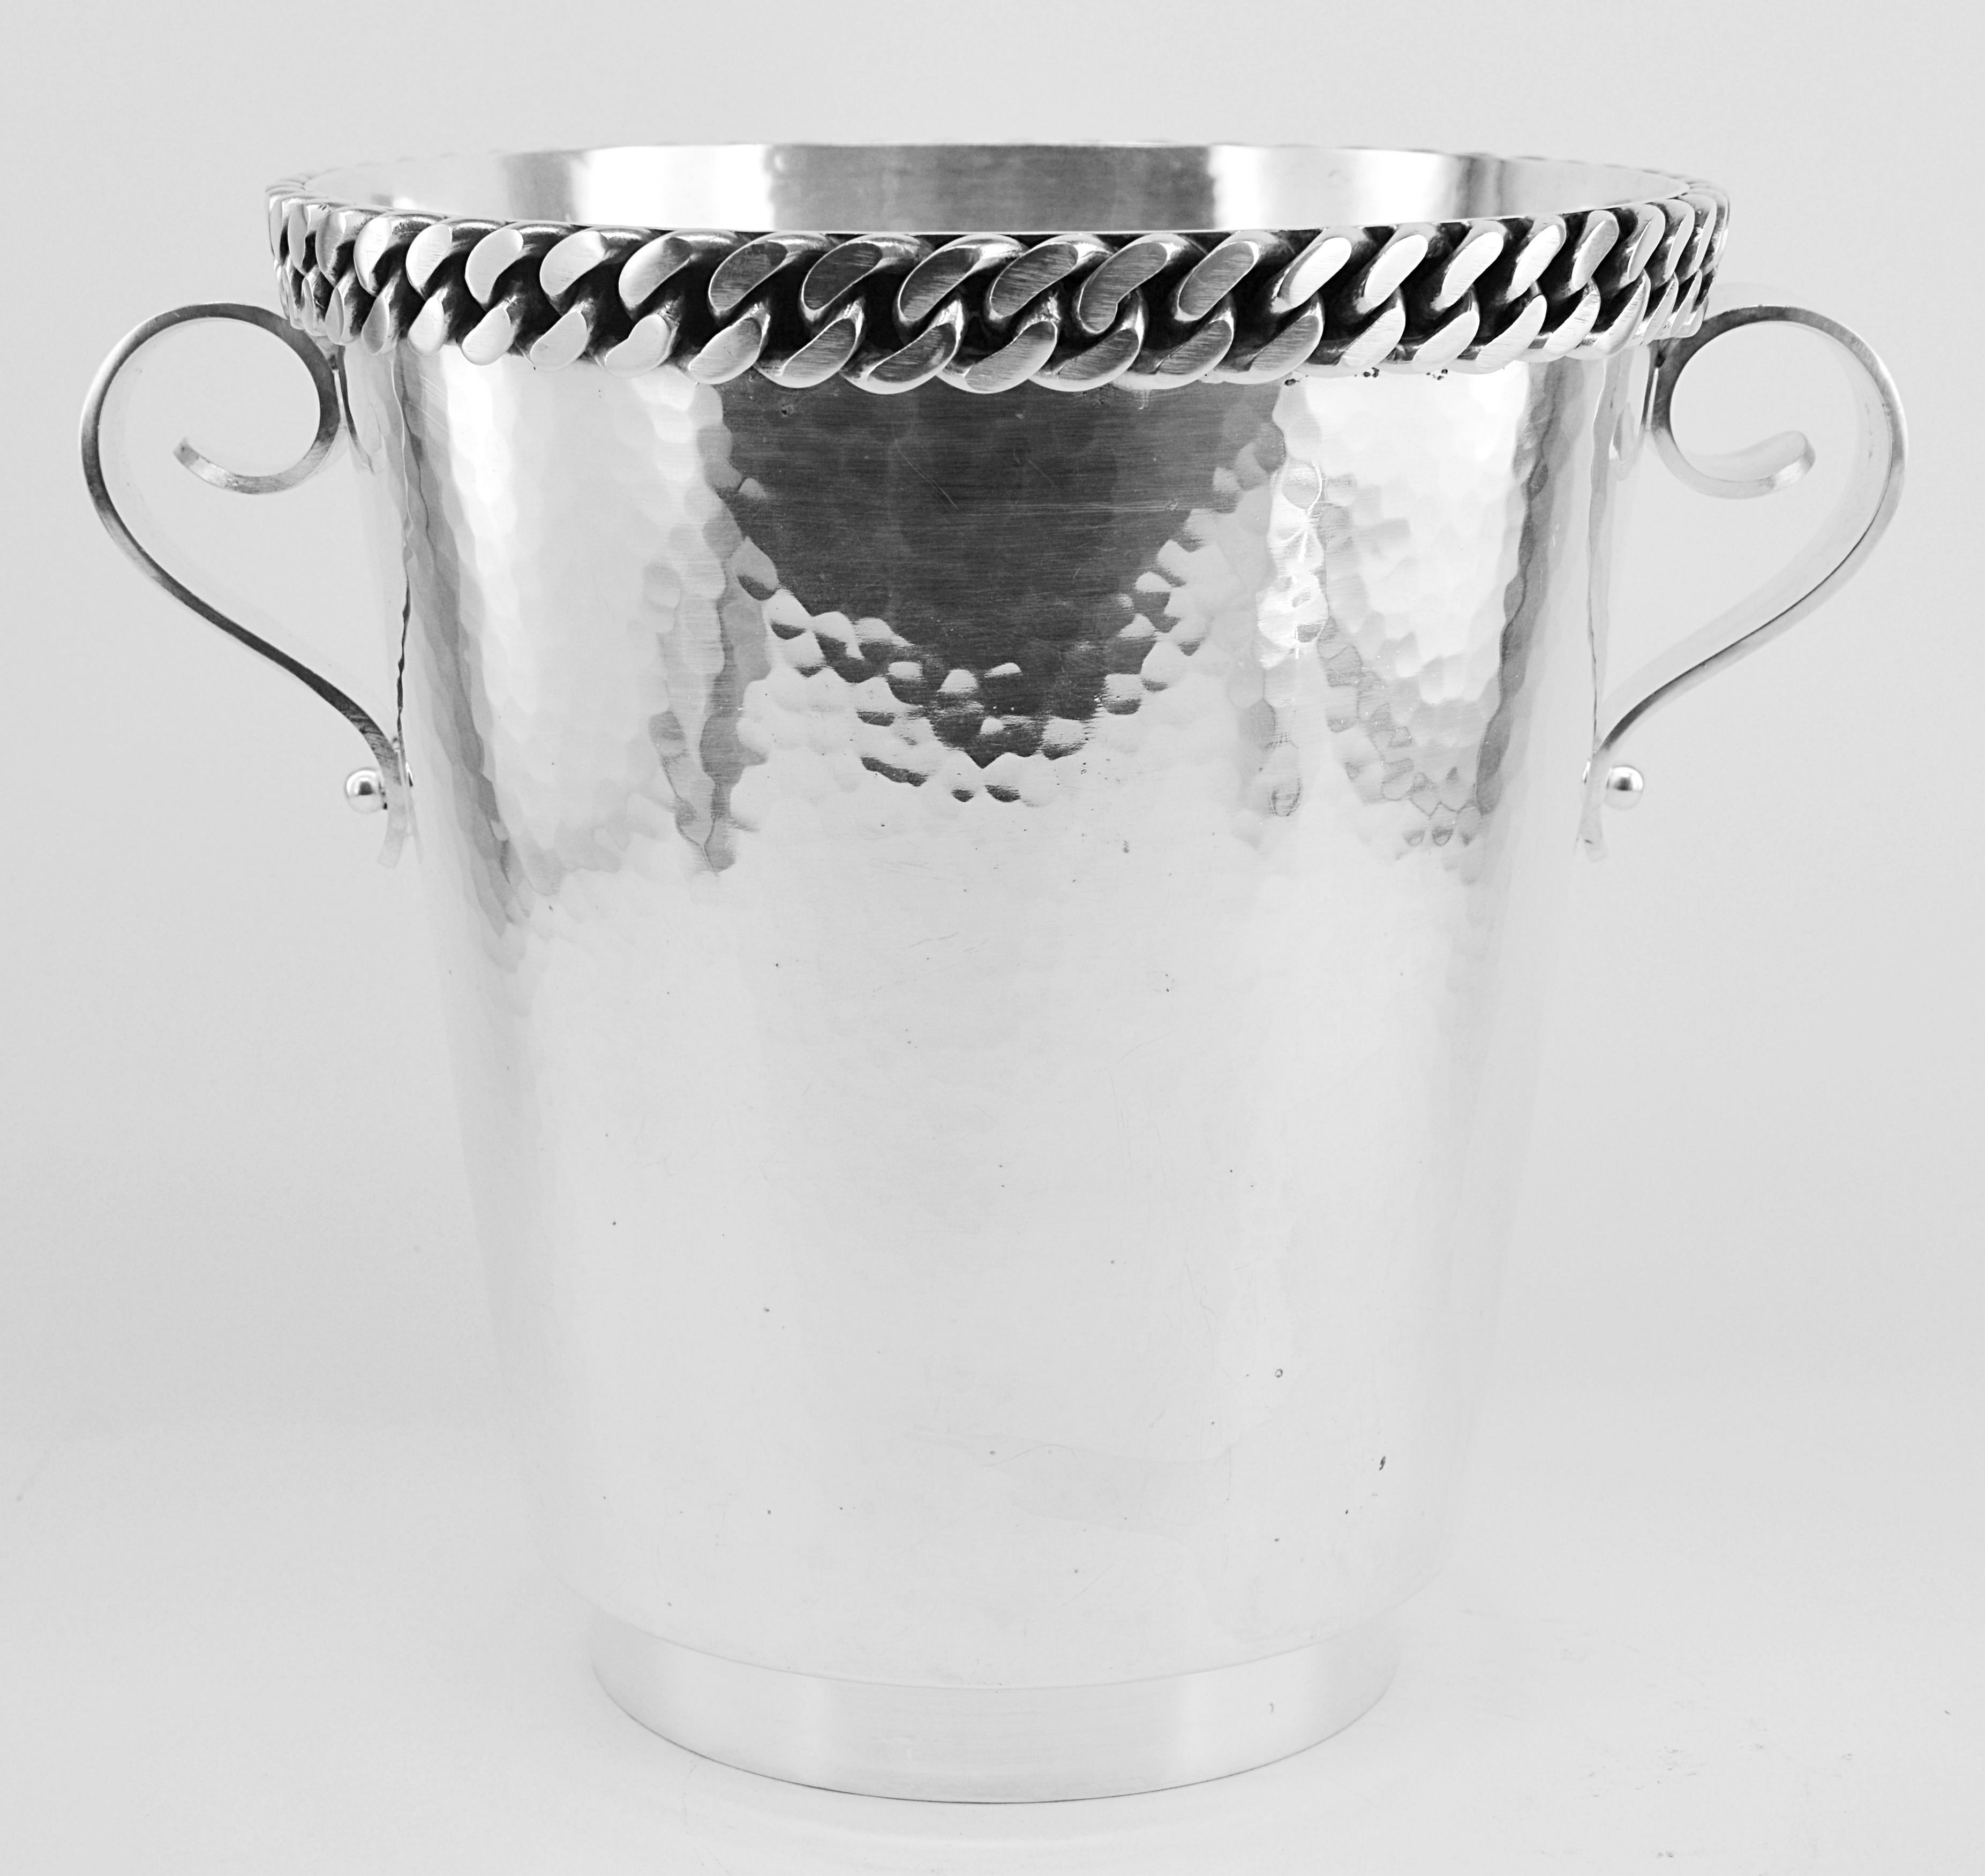 Champagne bucket by Jean Despres, France, circa 1950. Important hammered silver plated champagne bucket with cylindrical hammered body presenting two scrolled handles underlined with spheres and decorated at the top of the Jean Despres flat link